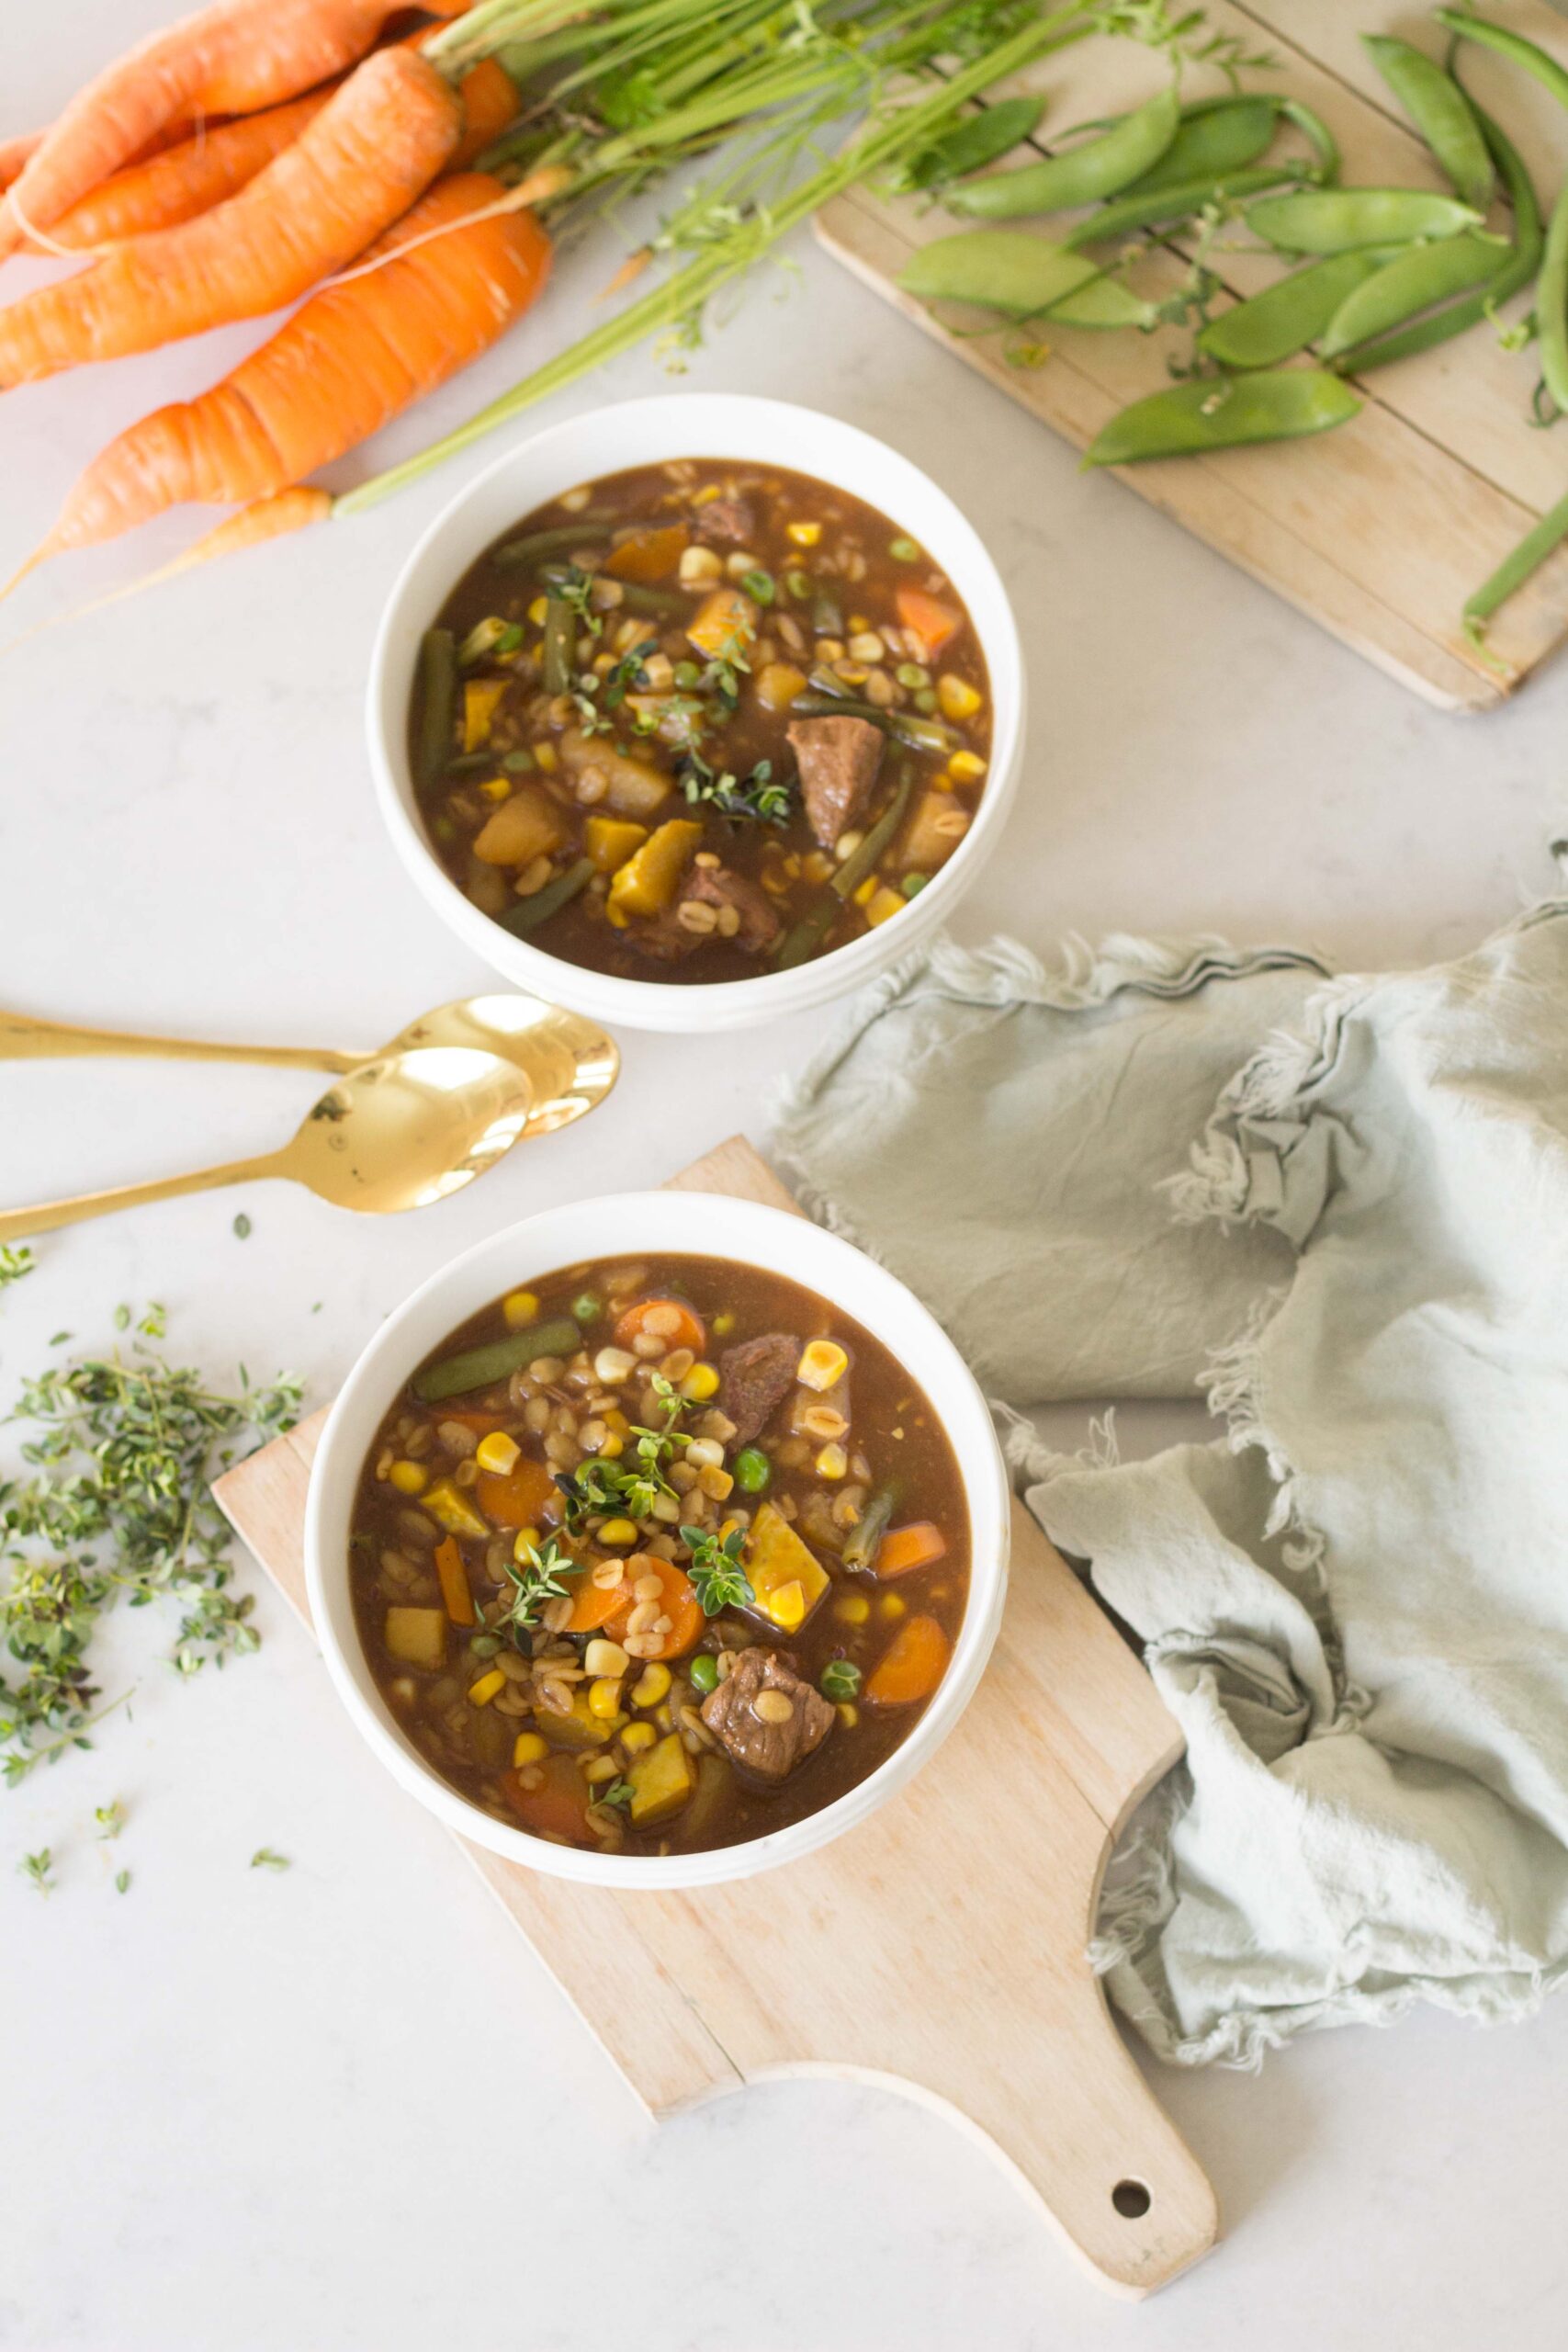 Rich Beef and Barley Stew